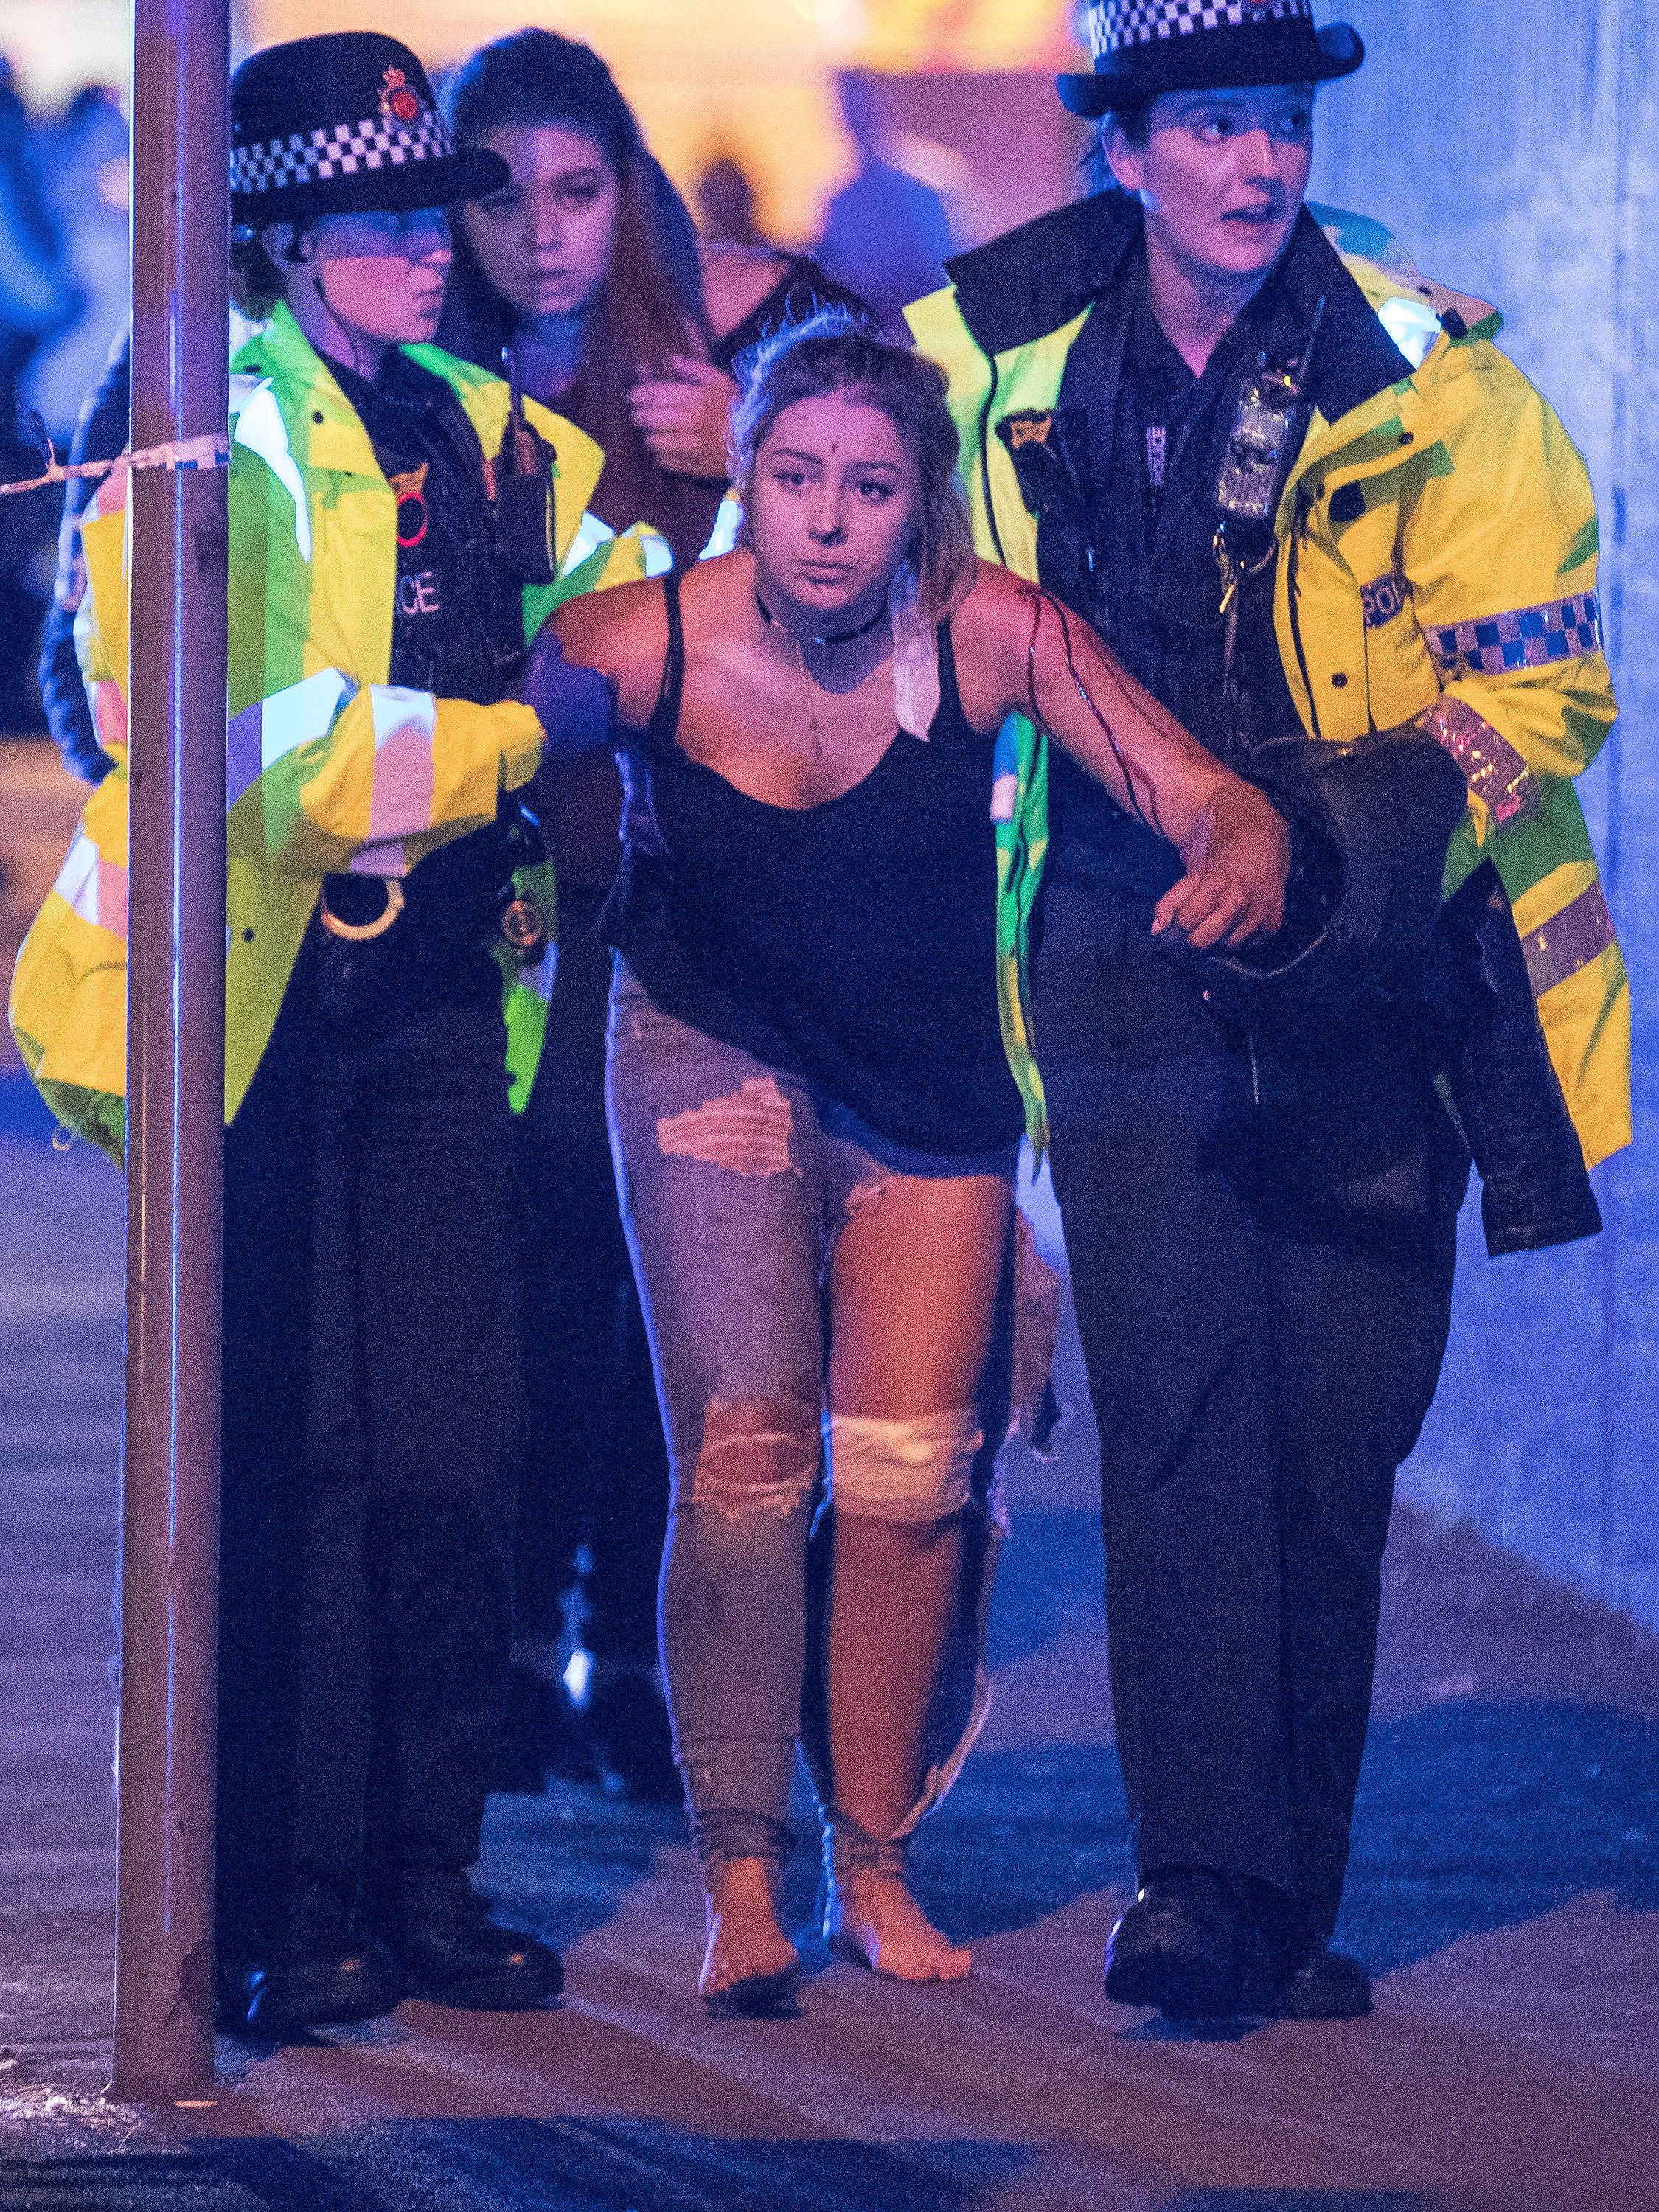 Police help an injured concert-goer in 2017. File photo: TNS